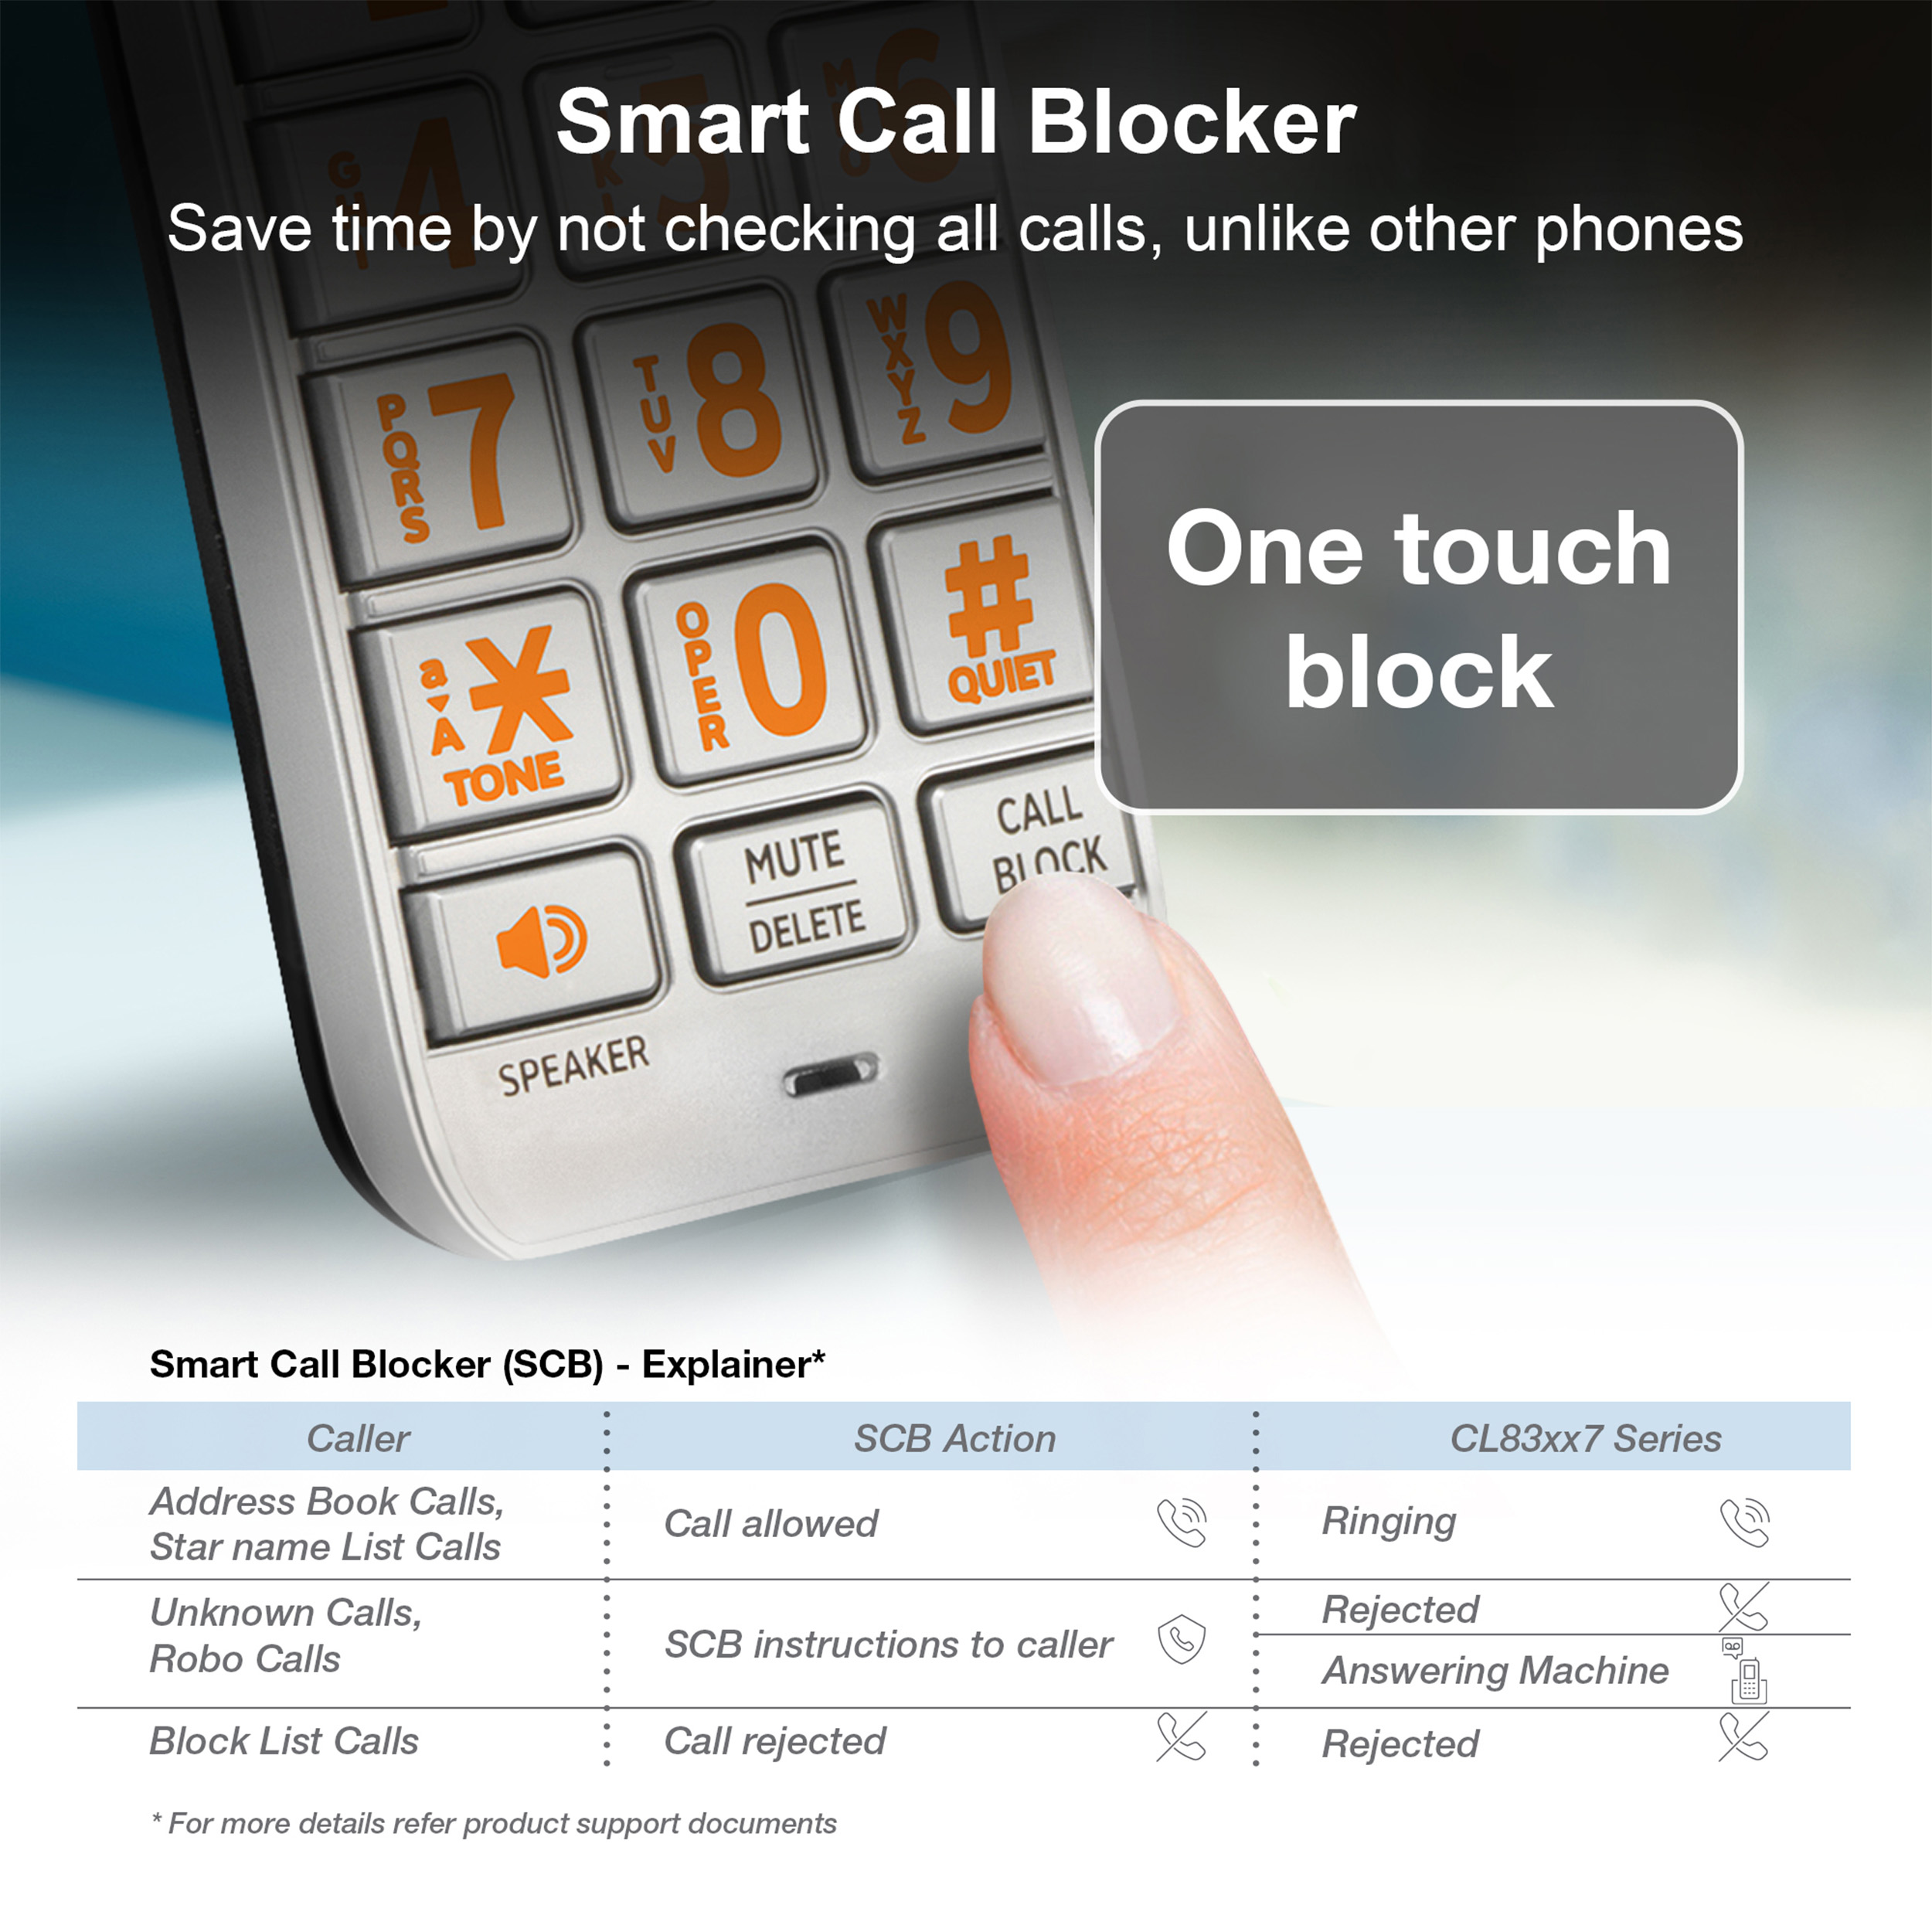 5-Handset Expandable Cordless Phone with Unsurpassed Range, Smart Call Blocker and Answering System - view 4